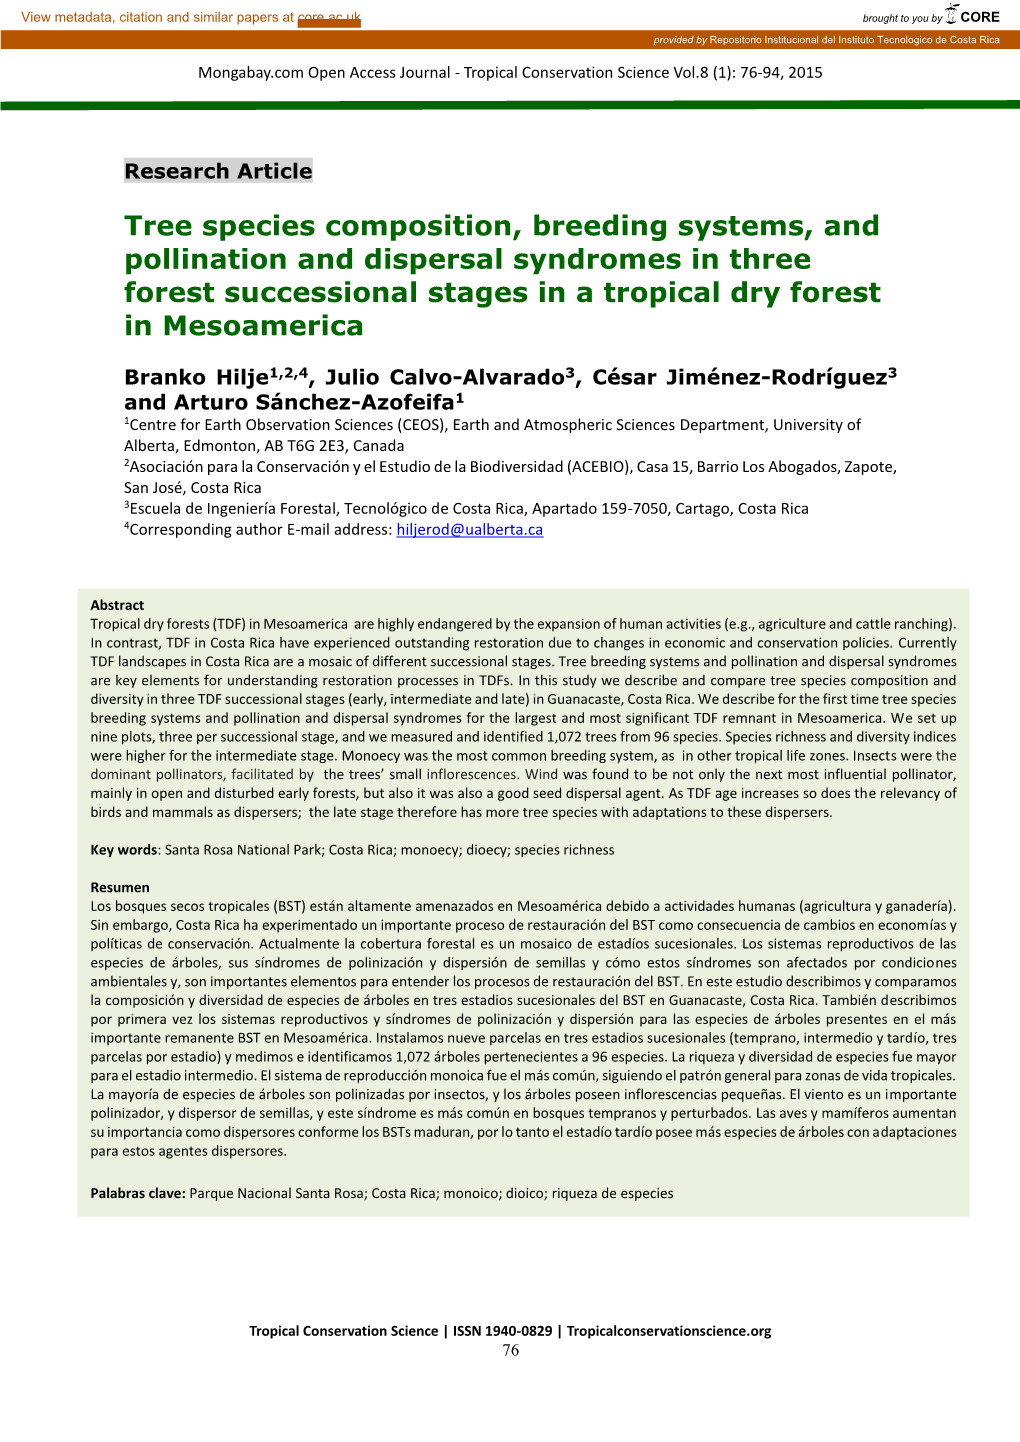 Tree Species Composition, Breeding Systems, and Pollination and Dispersal Syndromes in Three Forest Successional Stages in a Tropical Dry Forest in Mesoamerica